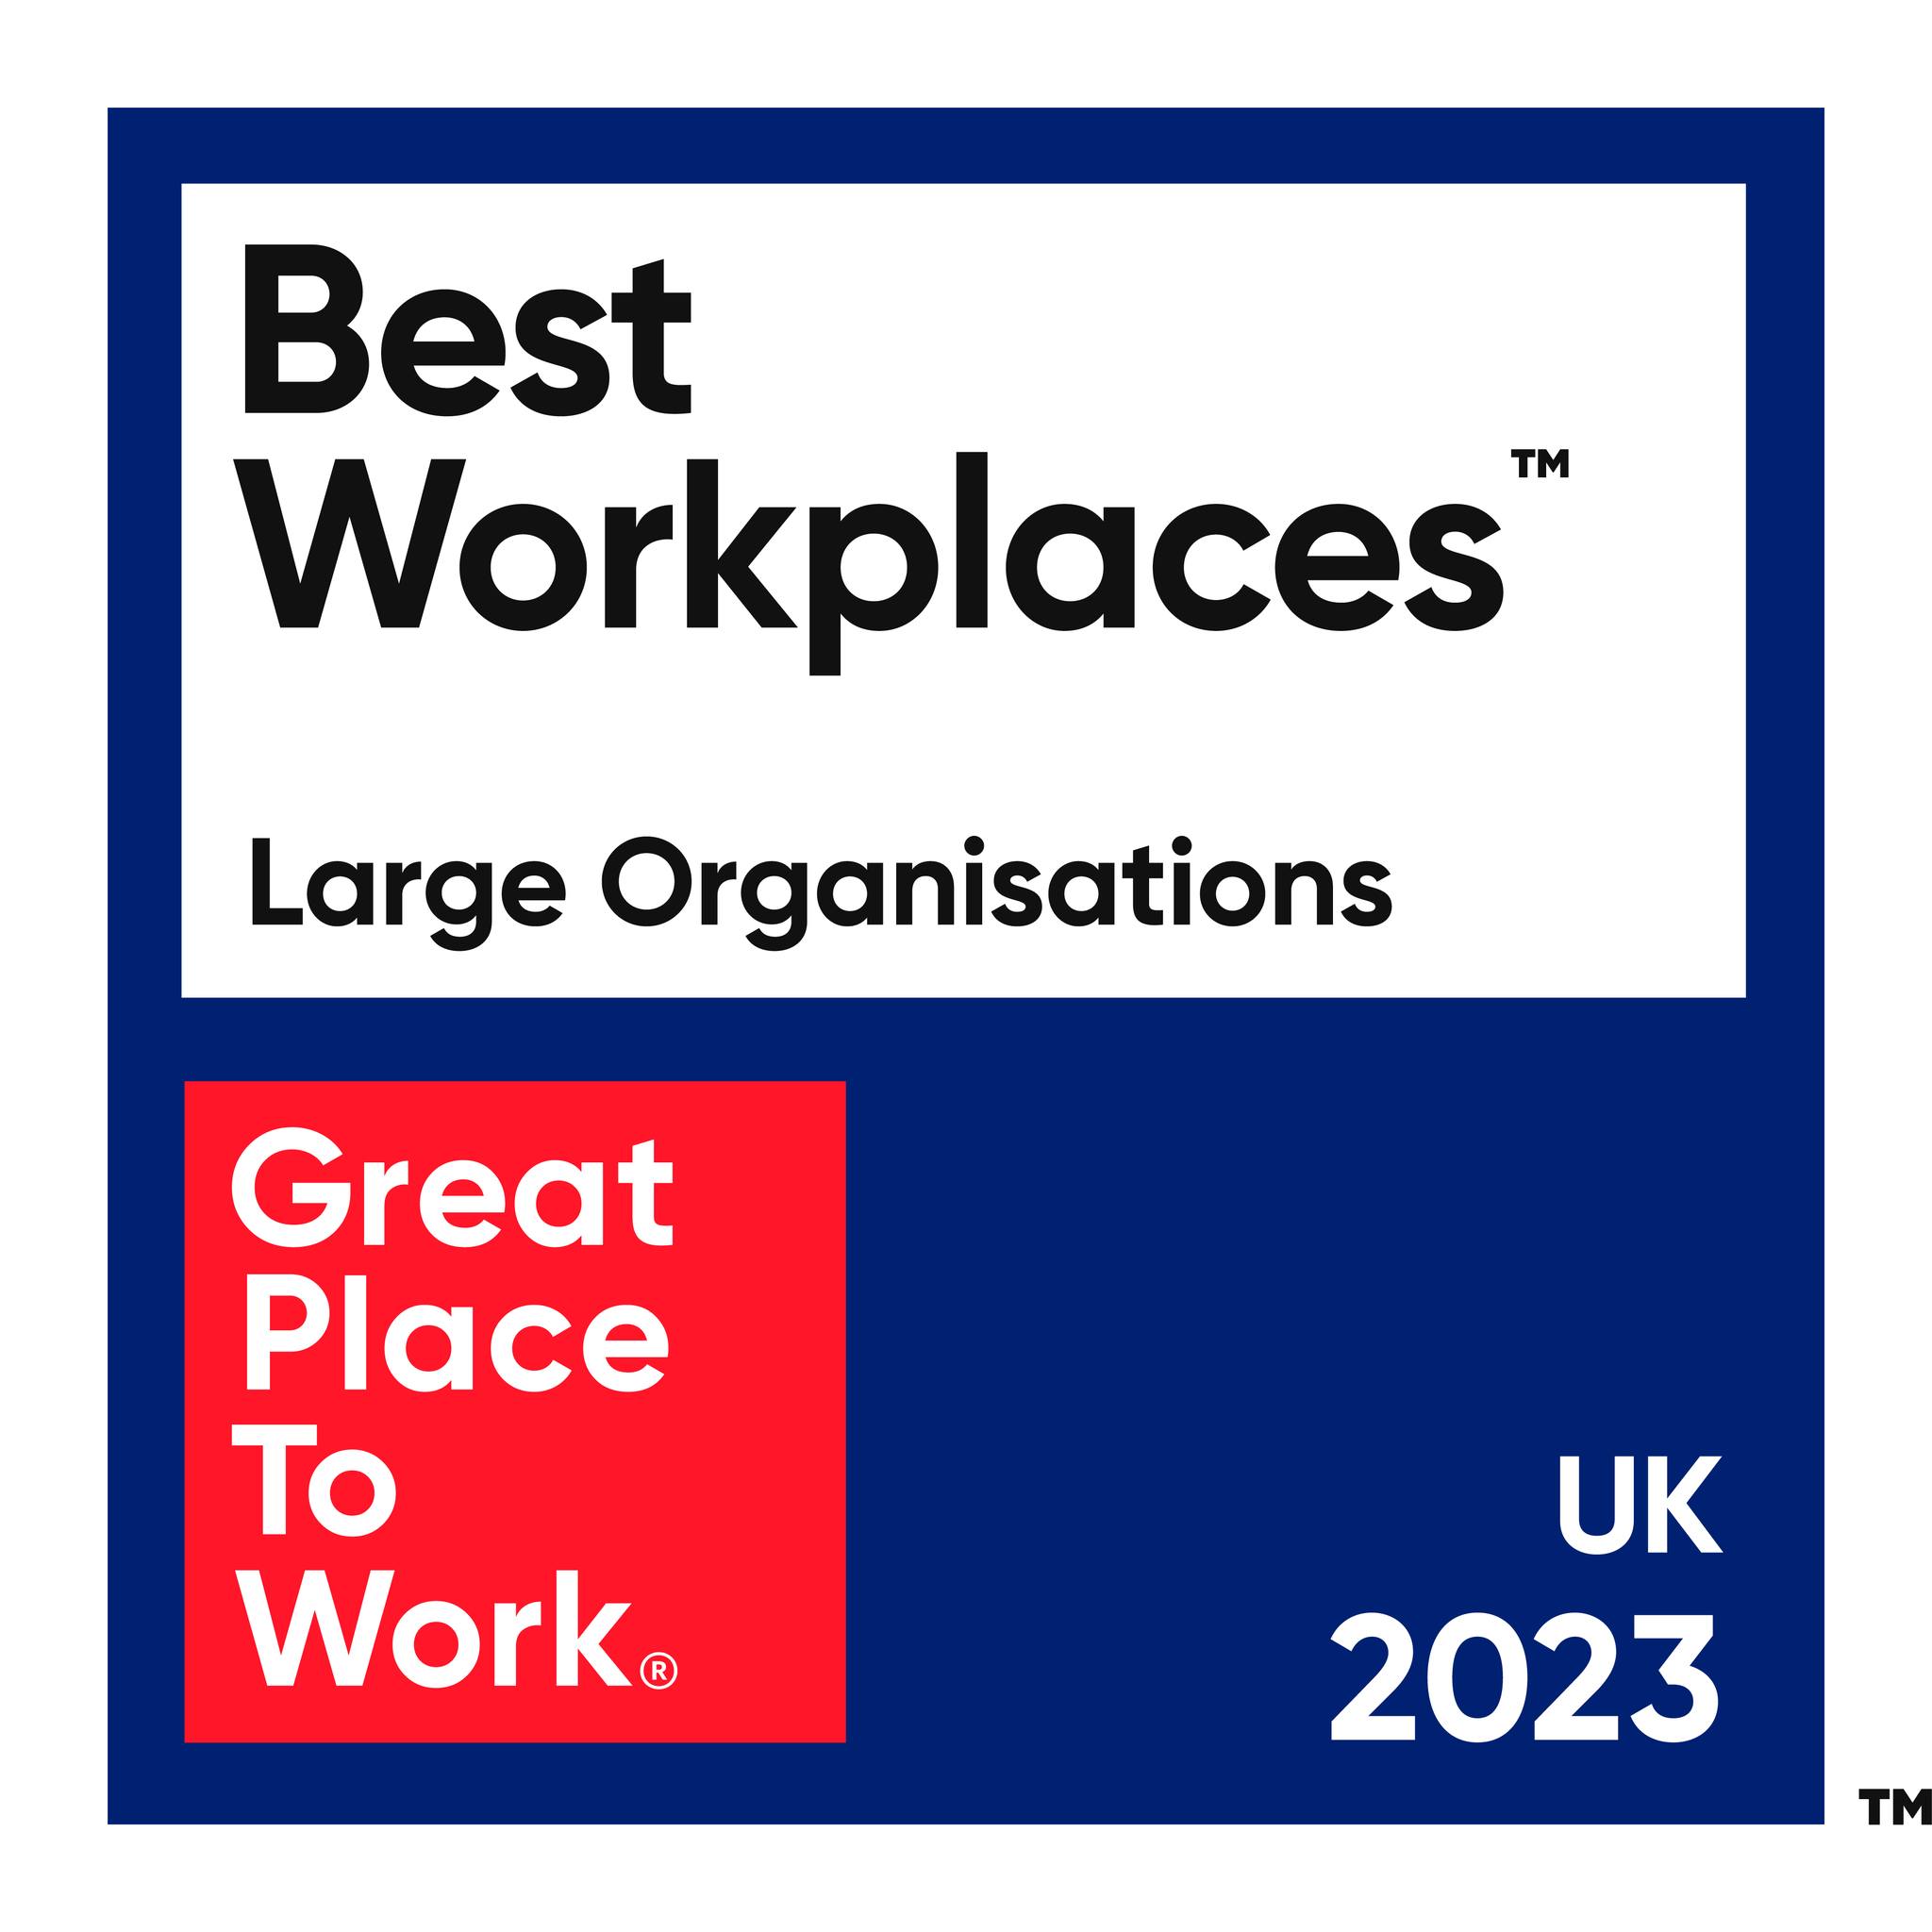 Best Workplaces Large Organisations